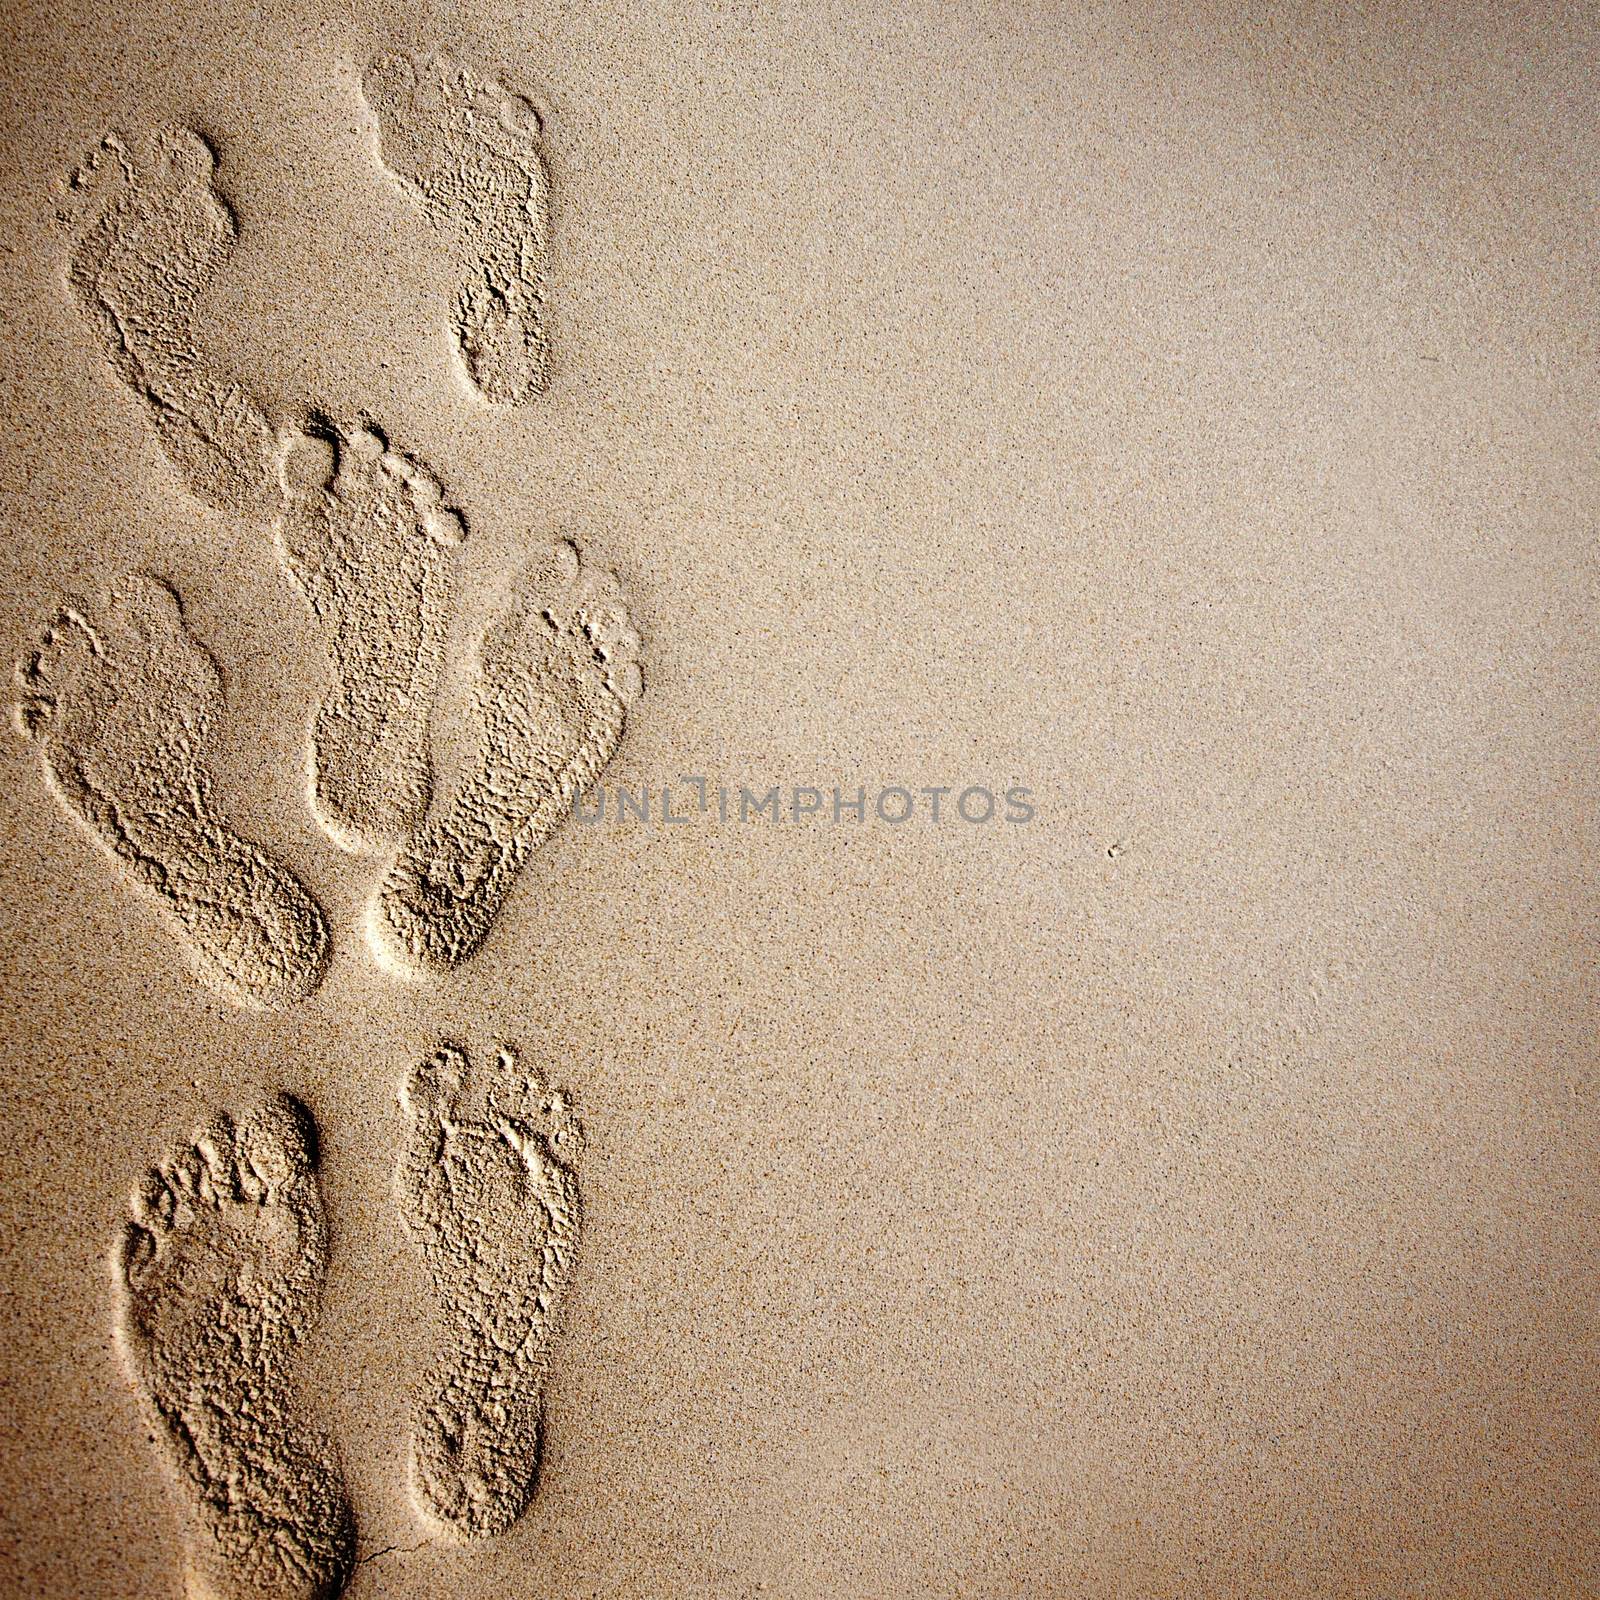 Beach background with footprints in the sand